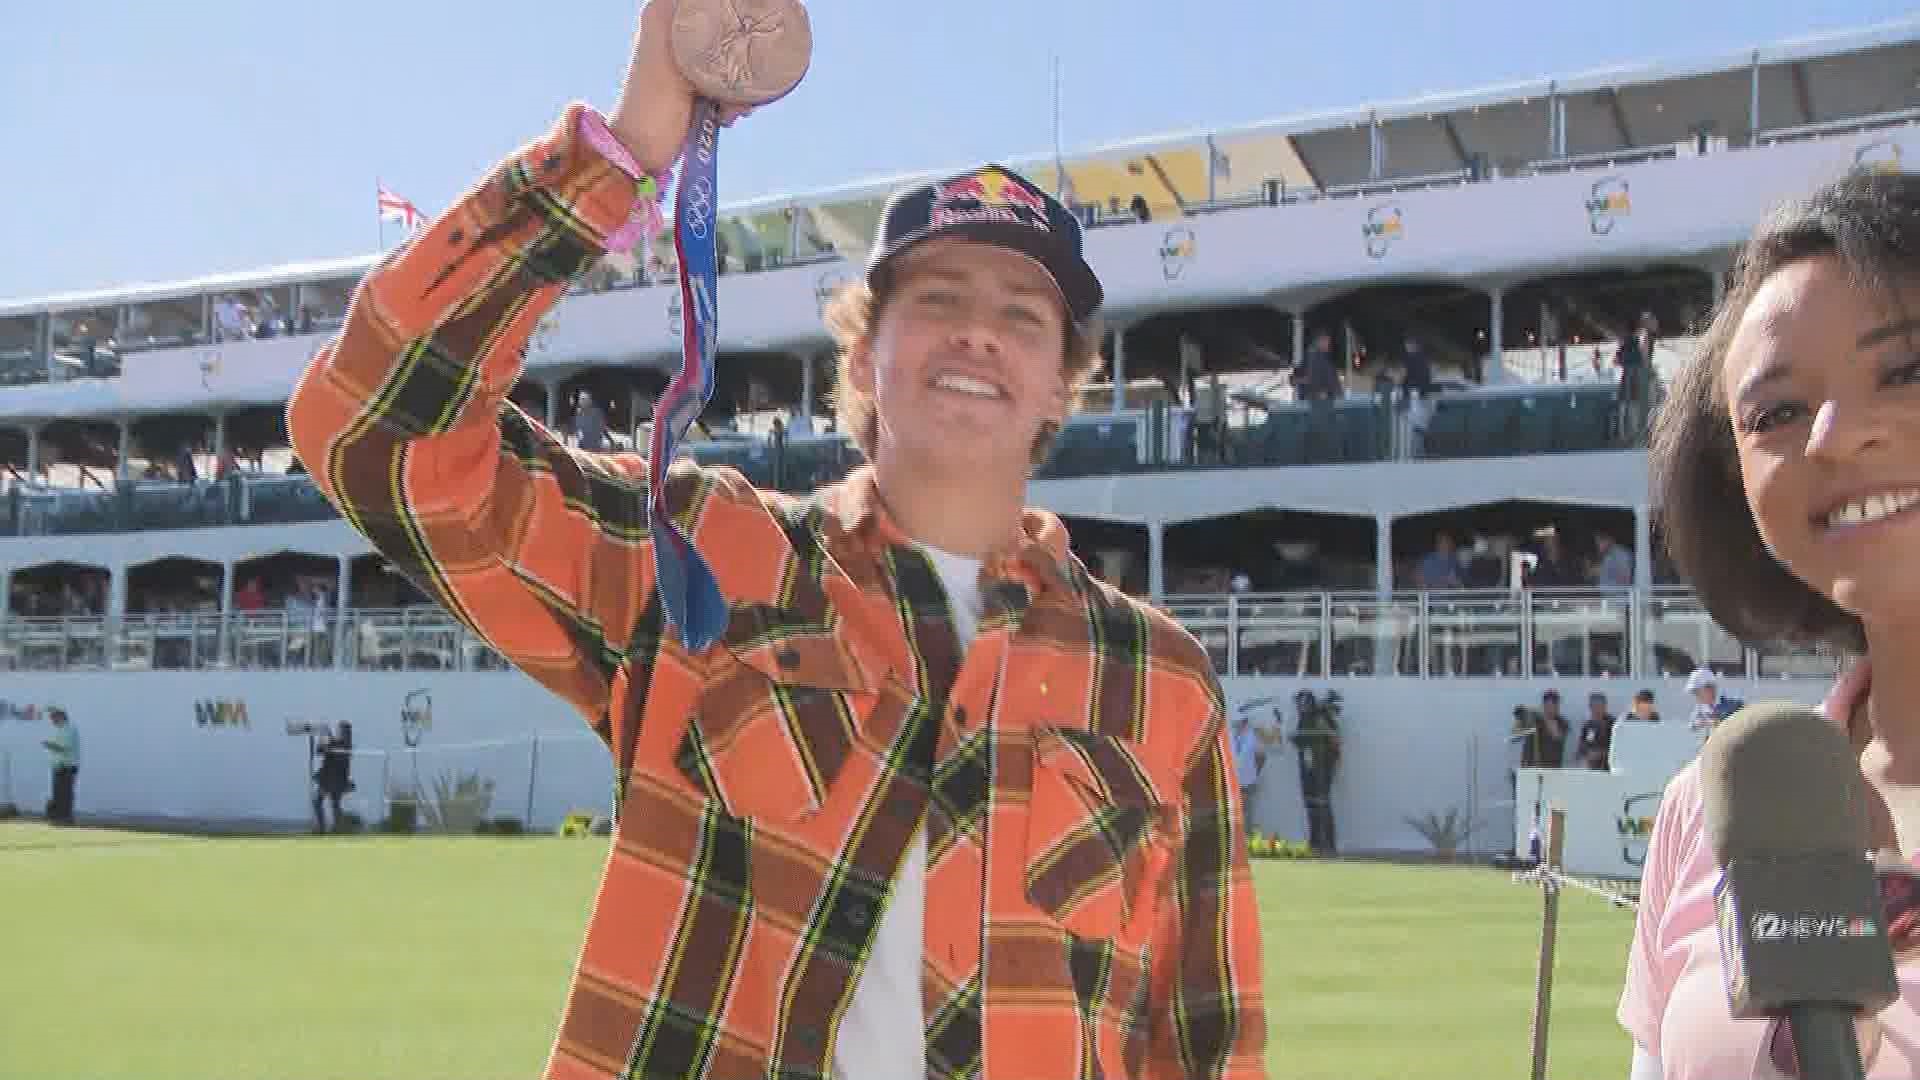 Olympic bronze medalist and skateboarder Jagger Eaton is out at the WM Phoenix Open. In an interview with 12 News, he said he is gifting the medal to his mom.